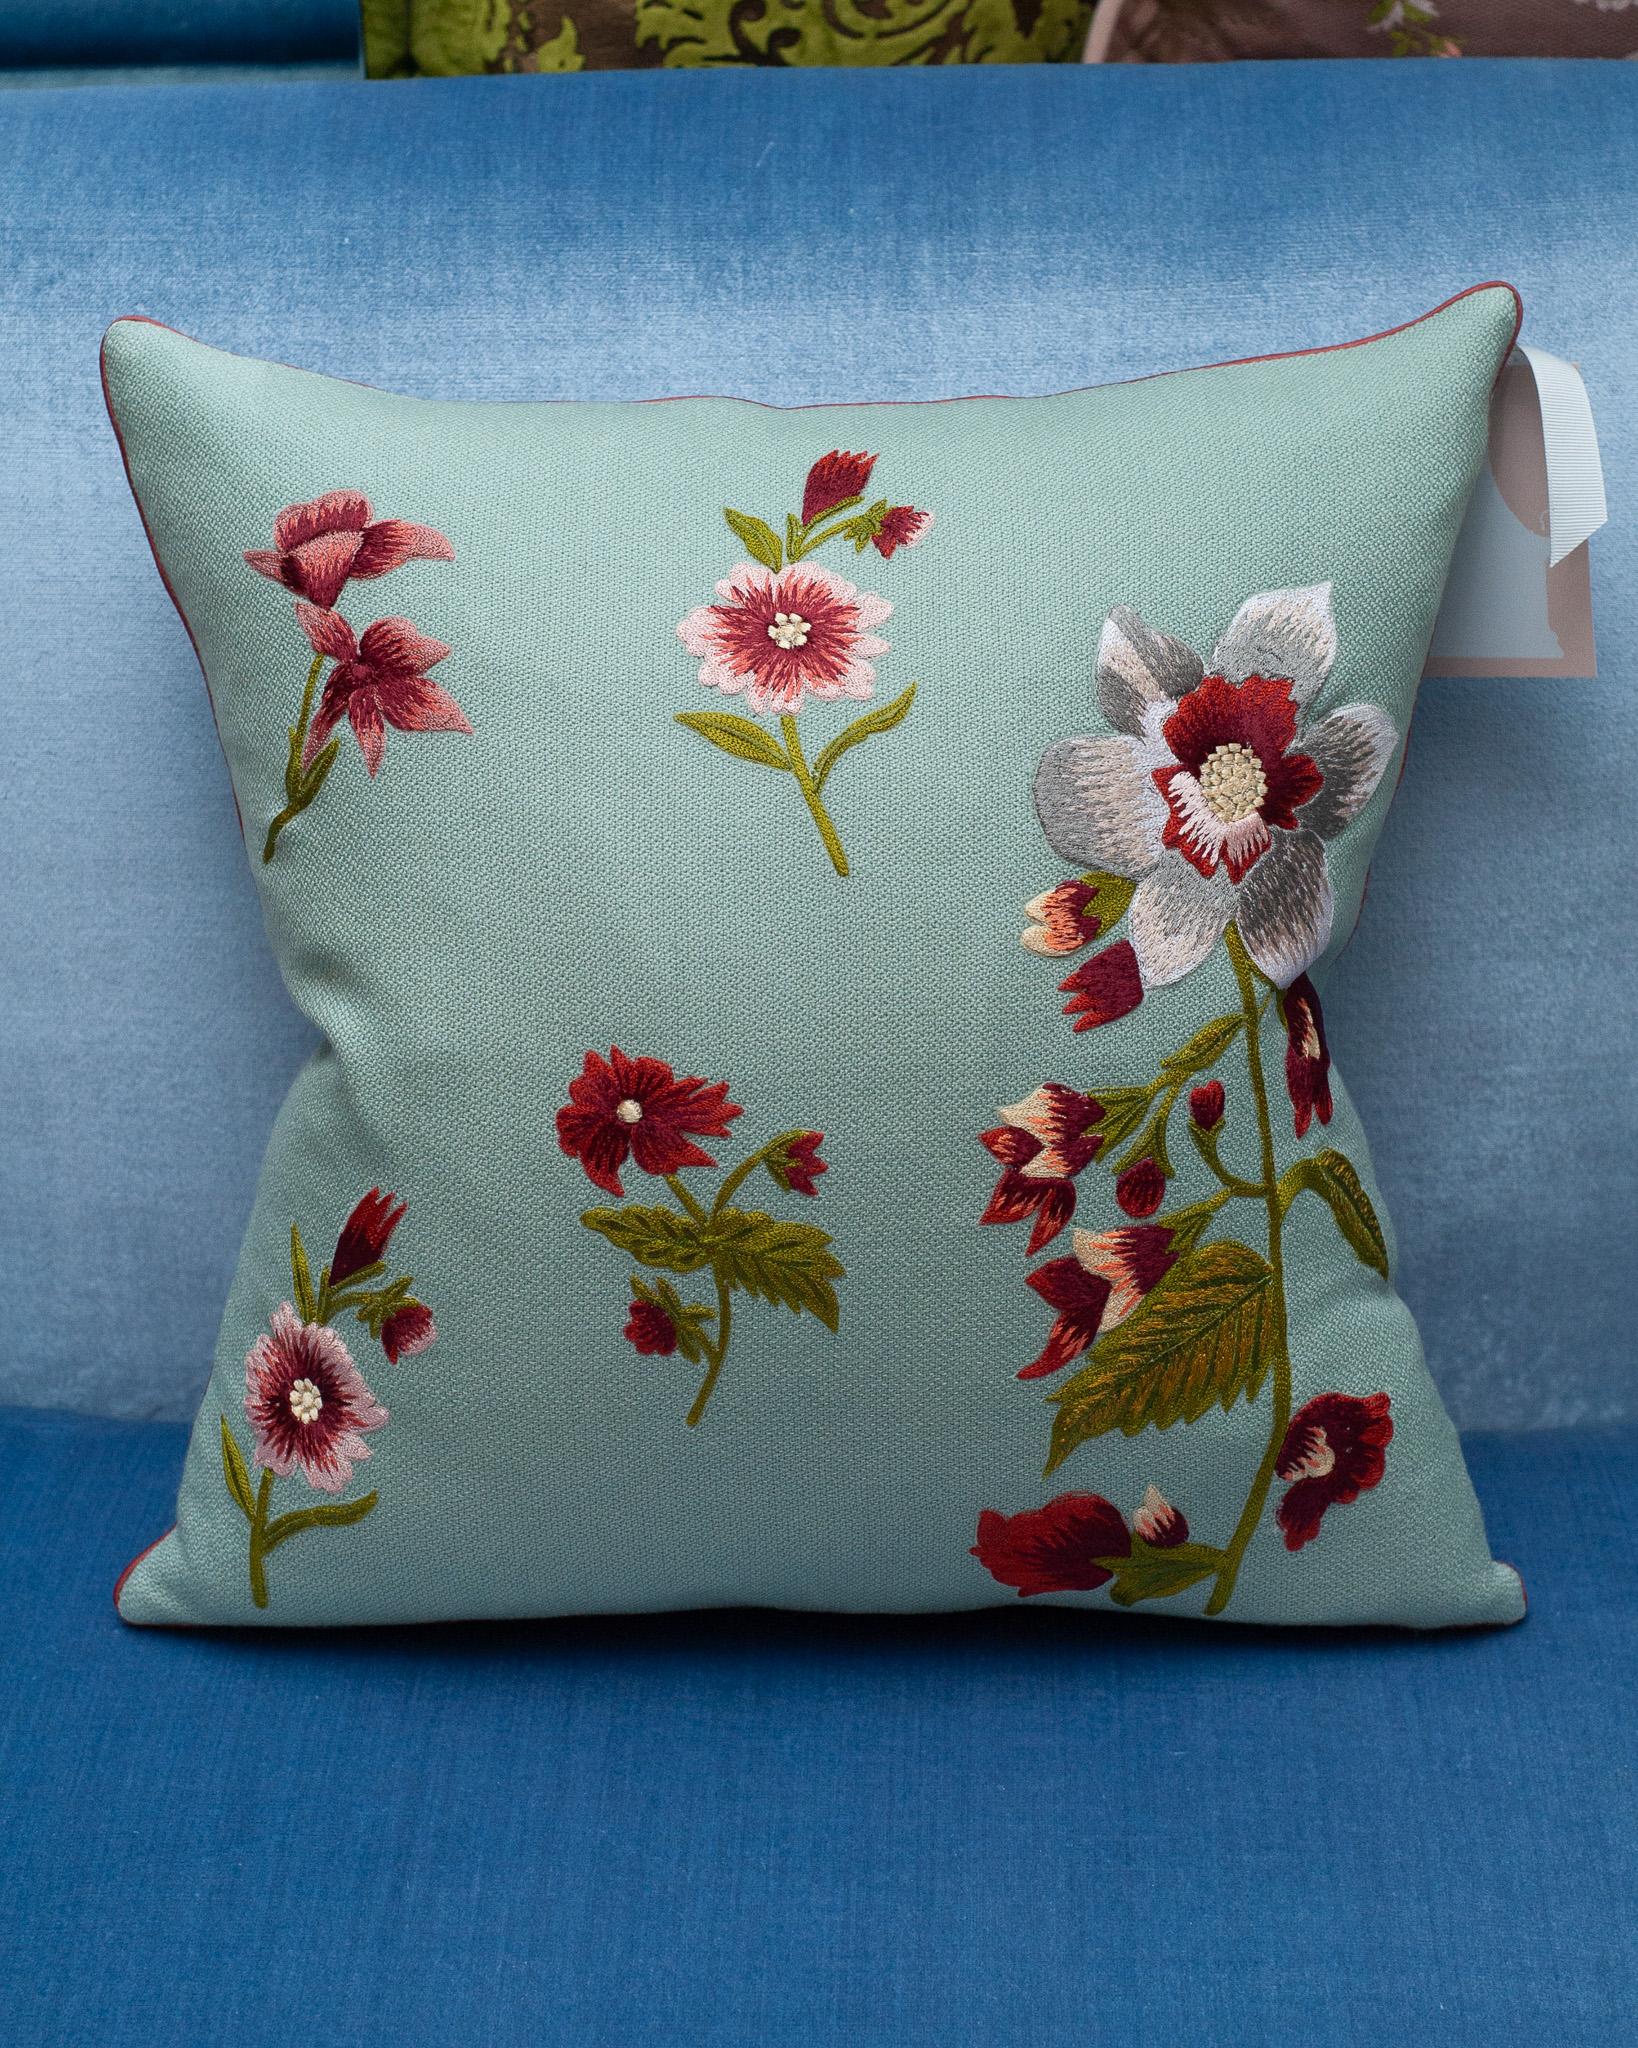 A stunning contemporary soft blue merino wool and linen pillow, trimmed with red piping and embroidered in wool with multiple floral motifs. Filled with the highest quality Canadian down and feather for a pillow that feels as luxurious as it is